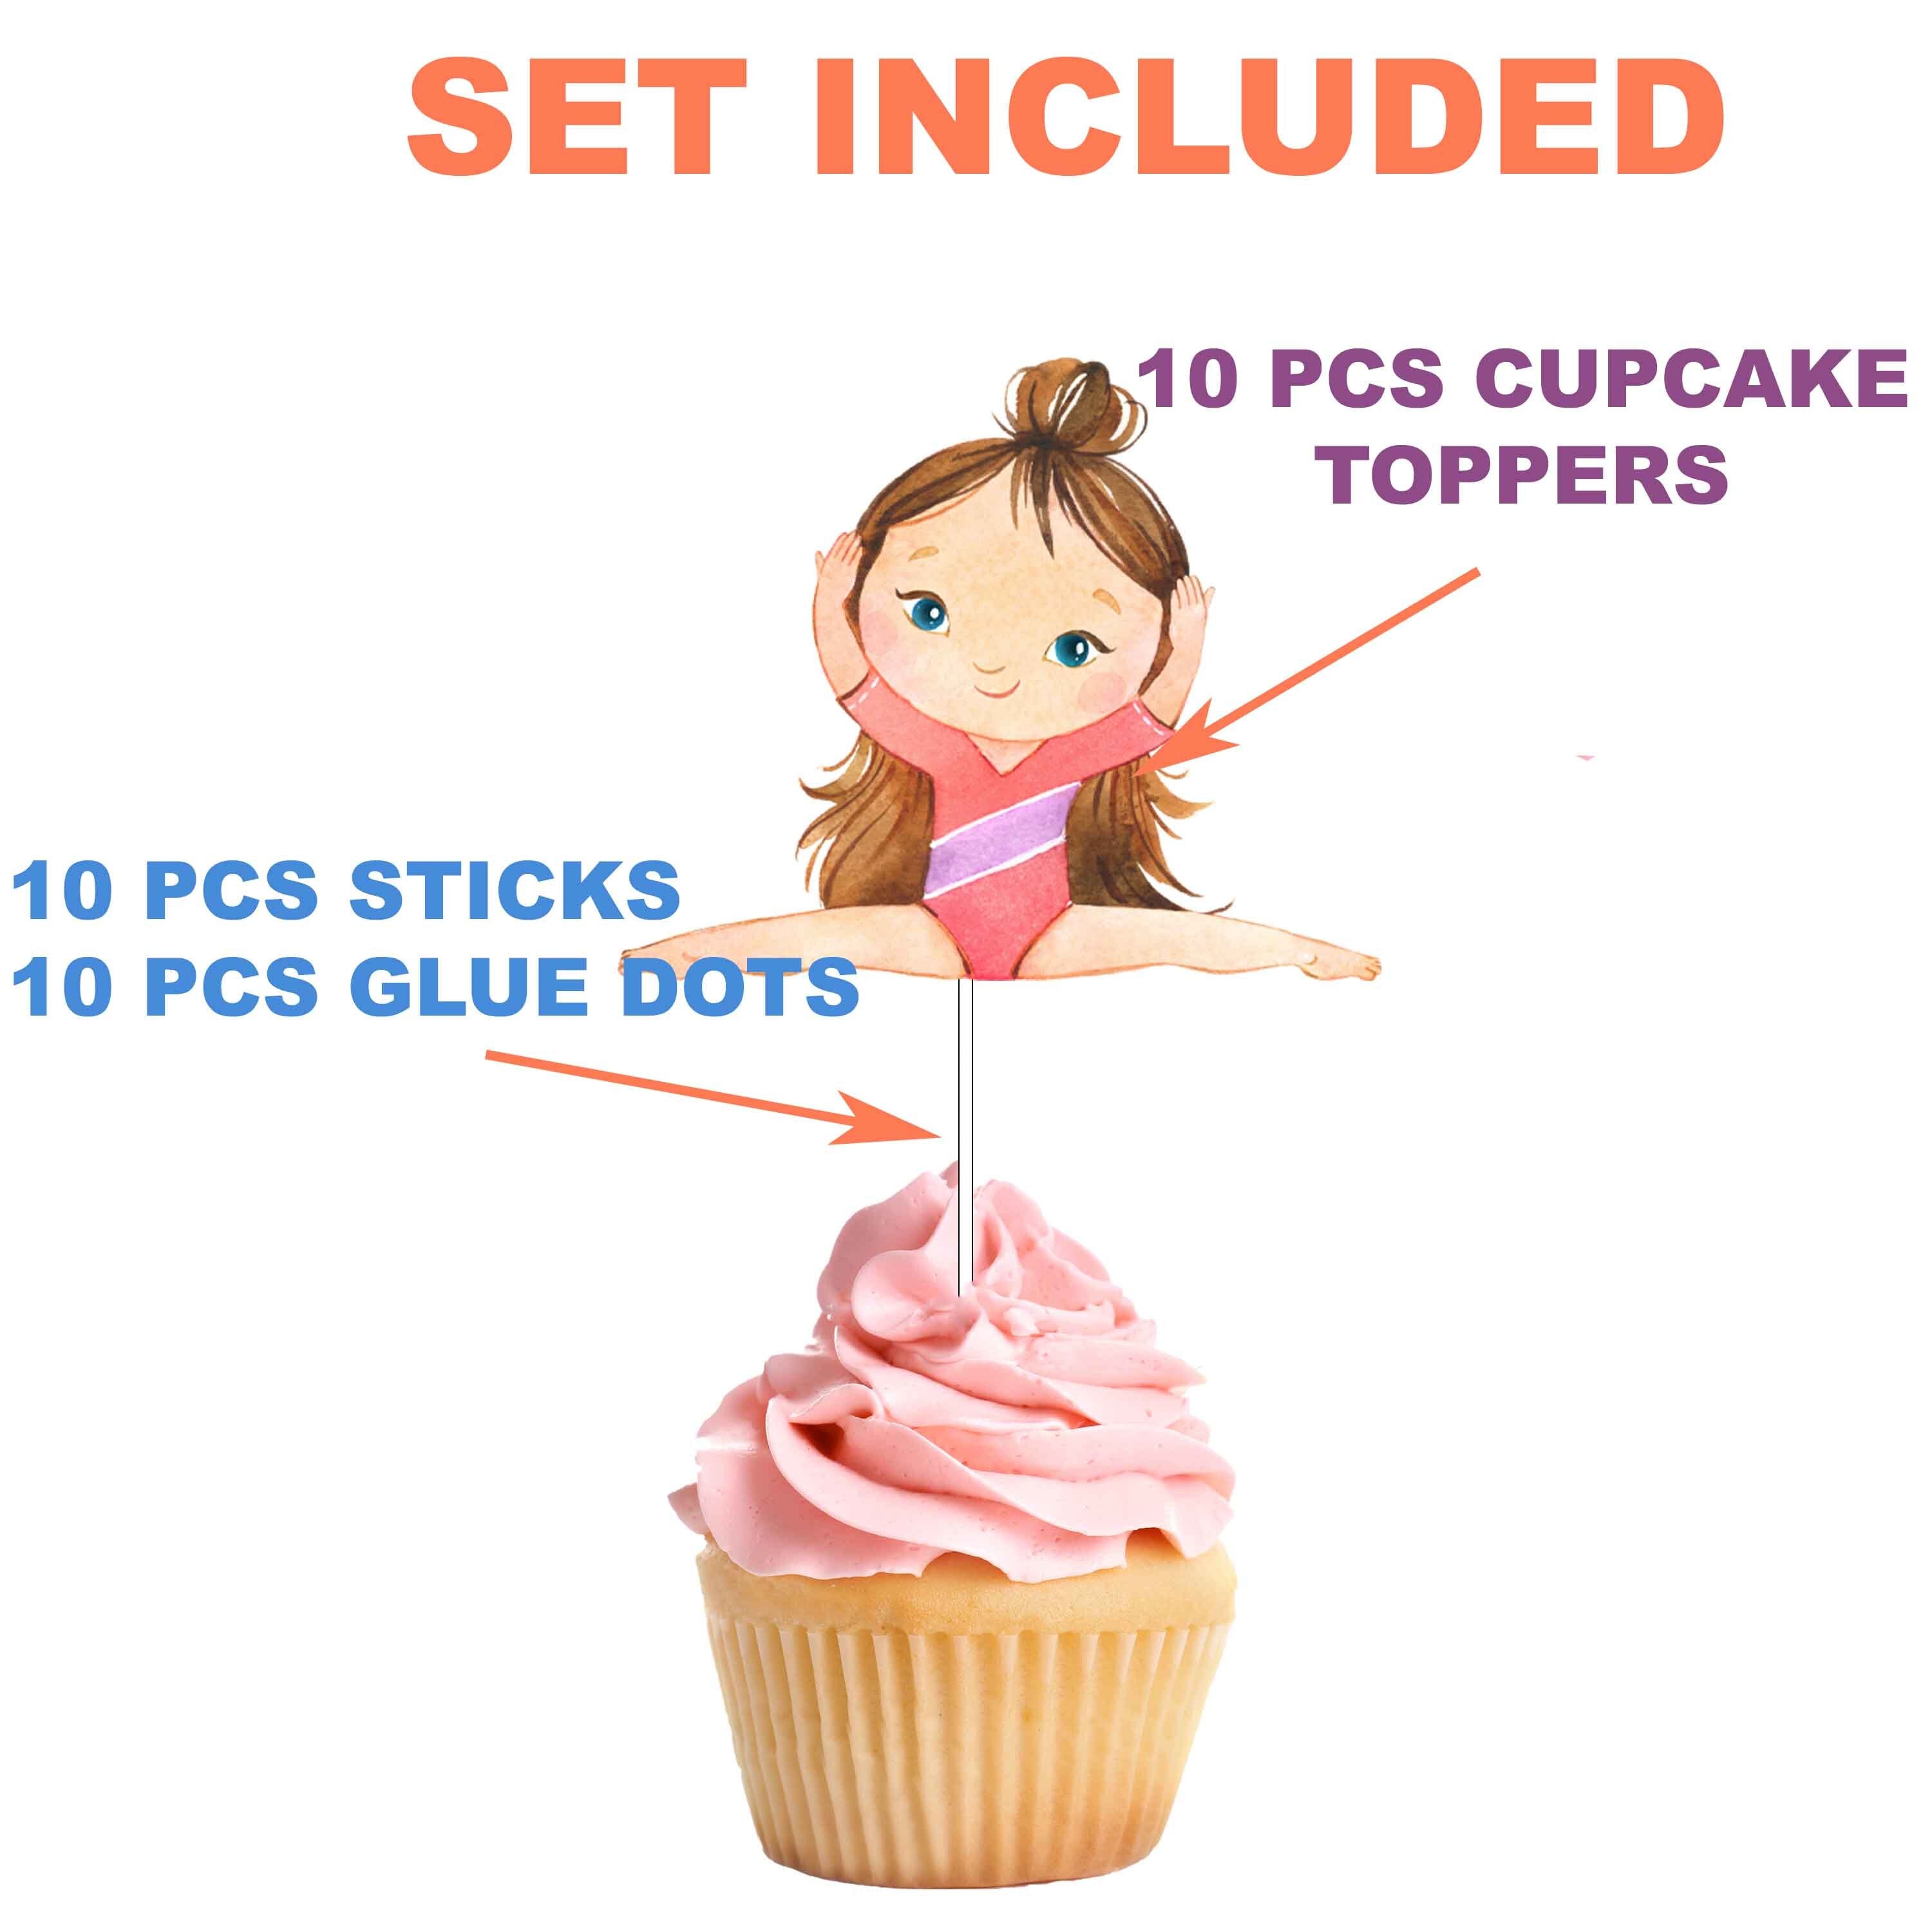 Graceful Gymnast Cupcake Toppers - Set of 10 Artistic Gymnastics Decorations for Parties and Competitions